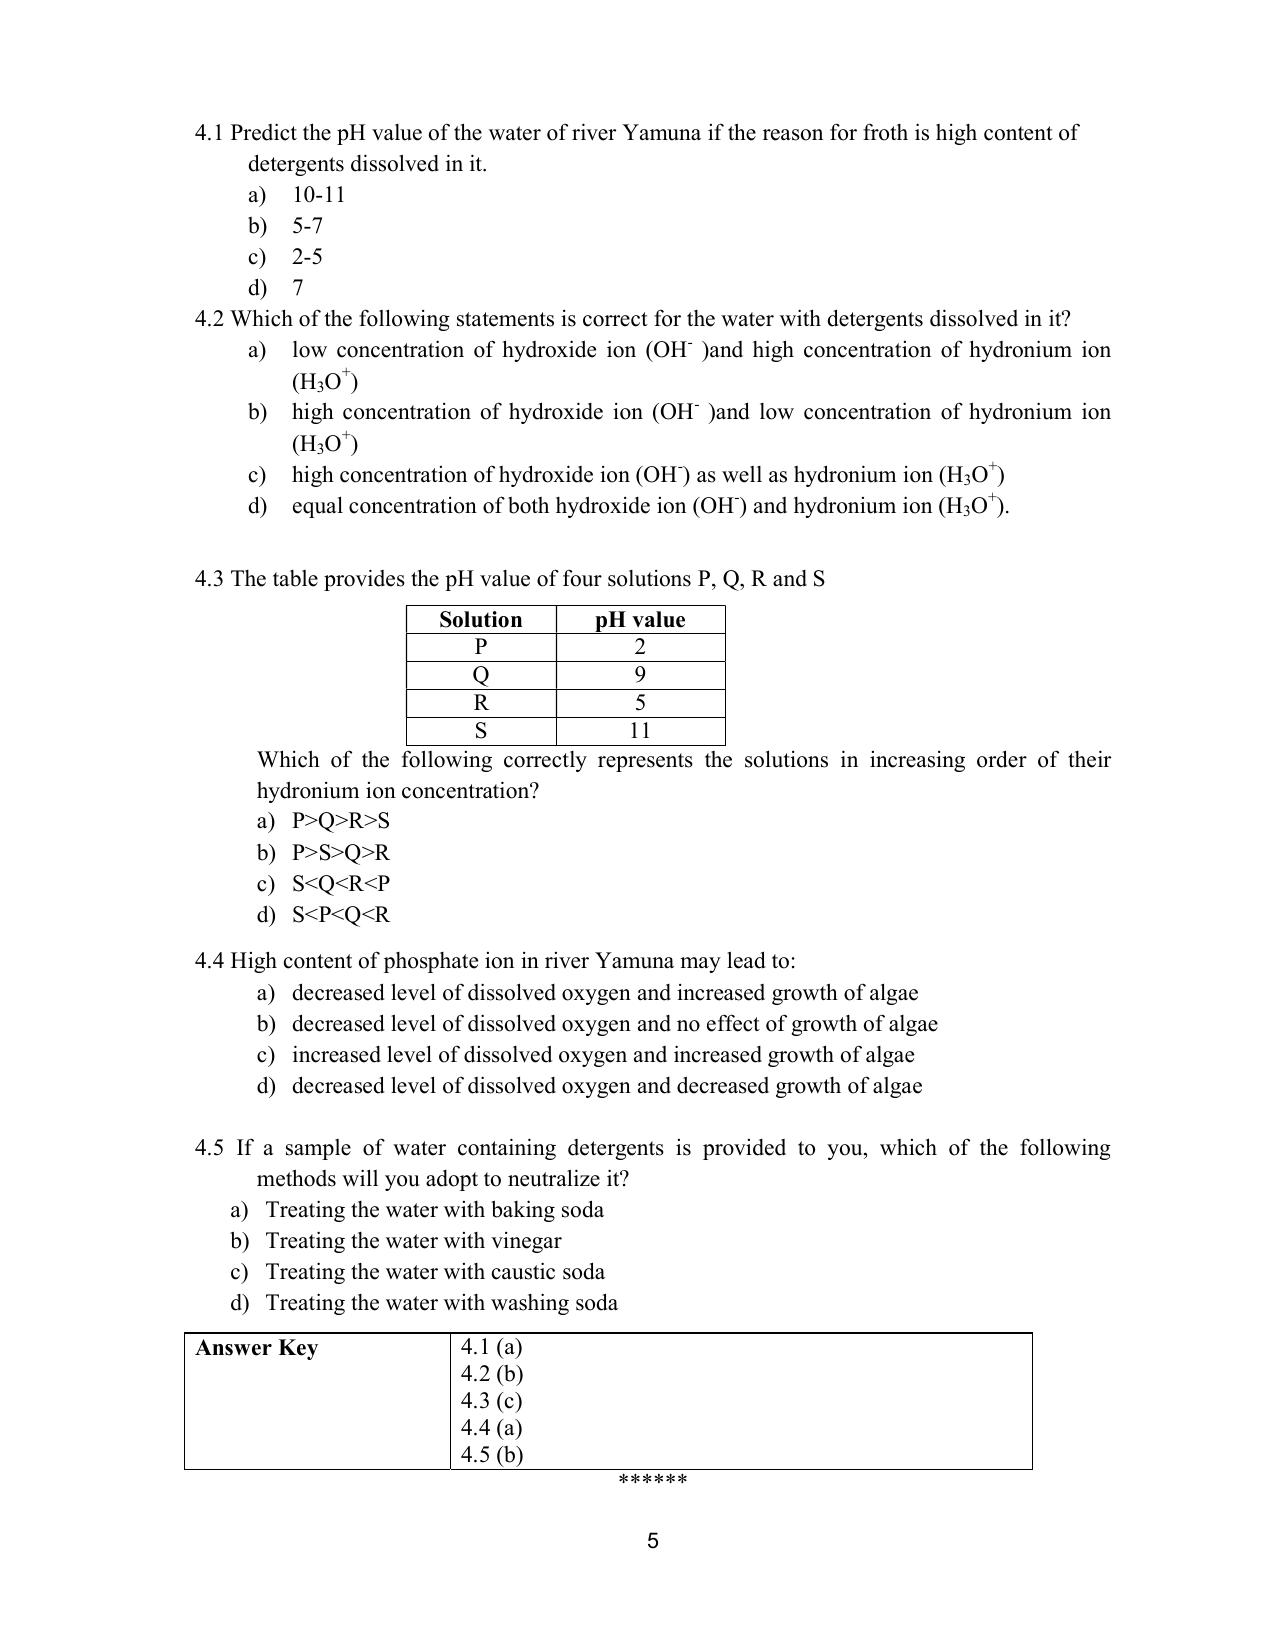 CBSE Class 10 Science Question Bank - Page 5